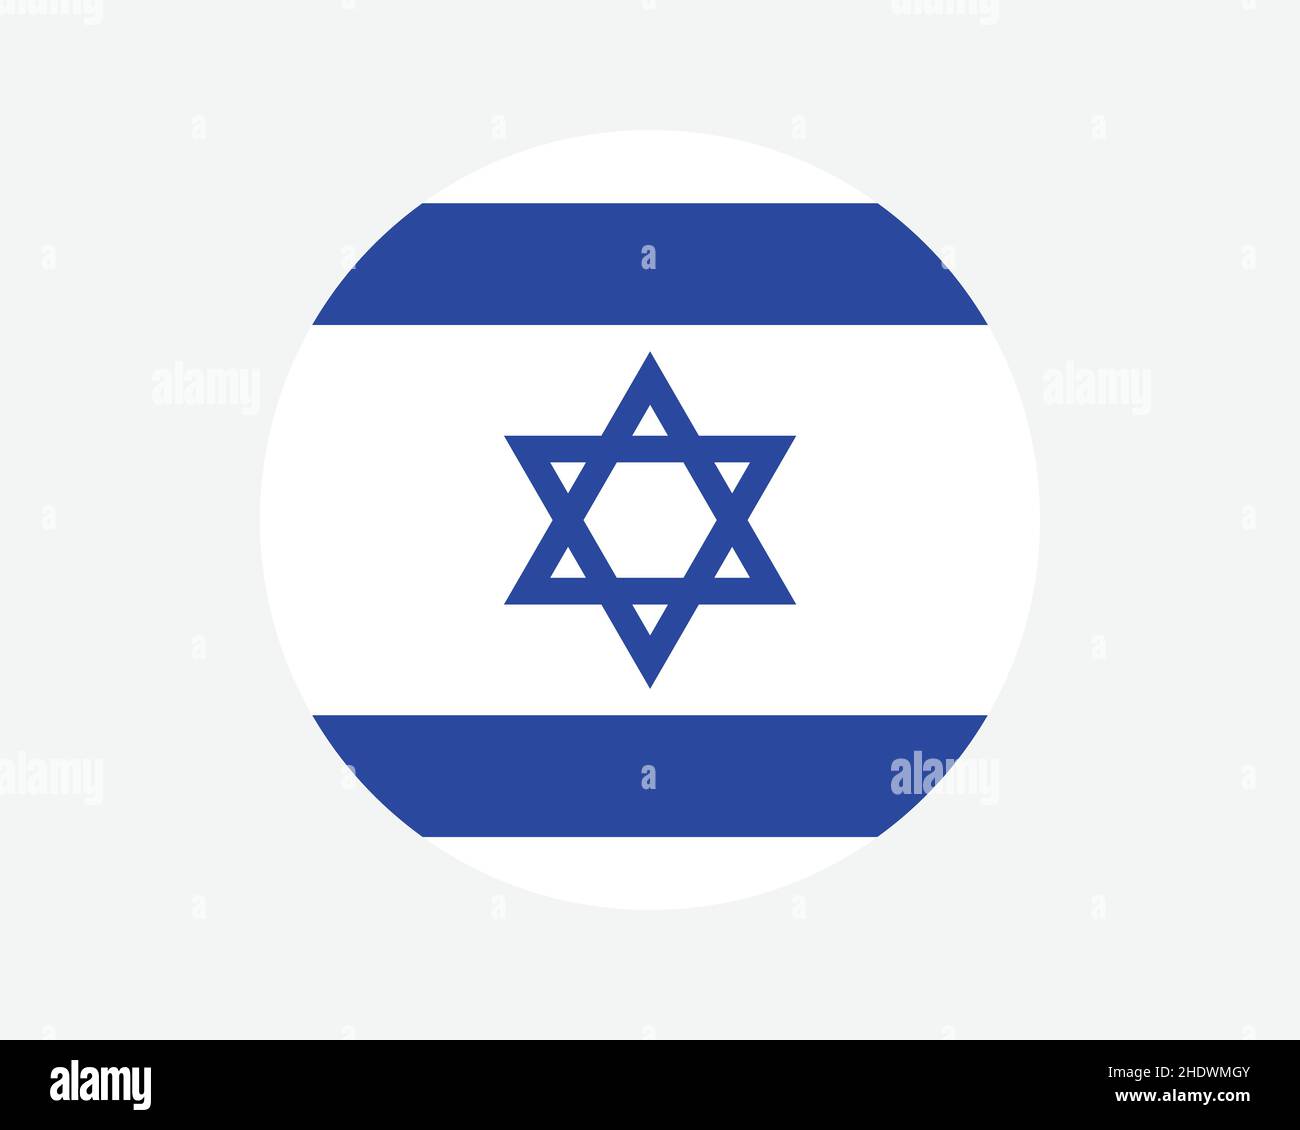 Israel Round Country Flag. Israeli Circle National Flag. State of Israel Circular Shape Button Banner. EPS Vector Illustration. Stock Vector